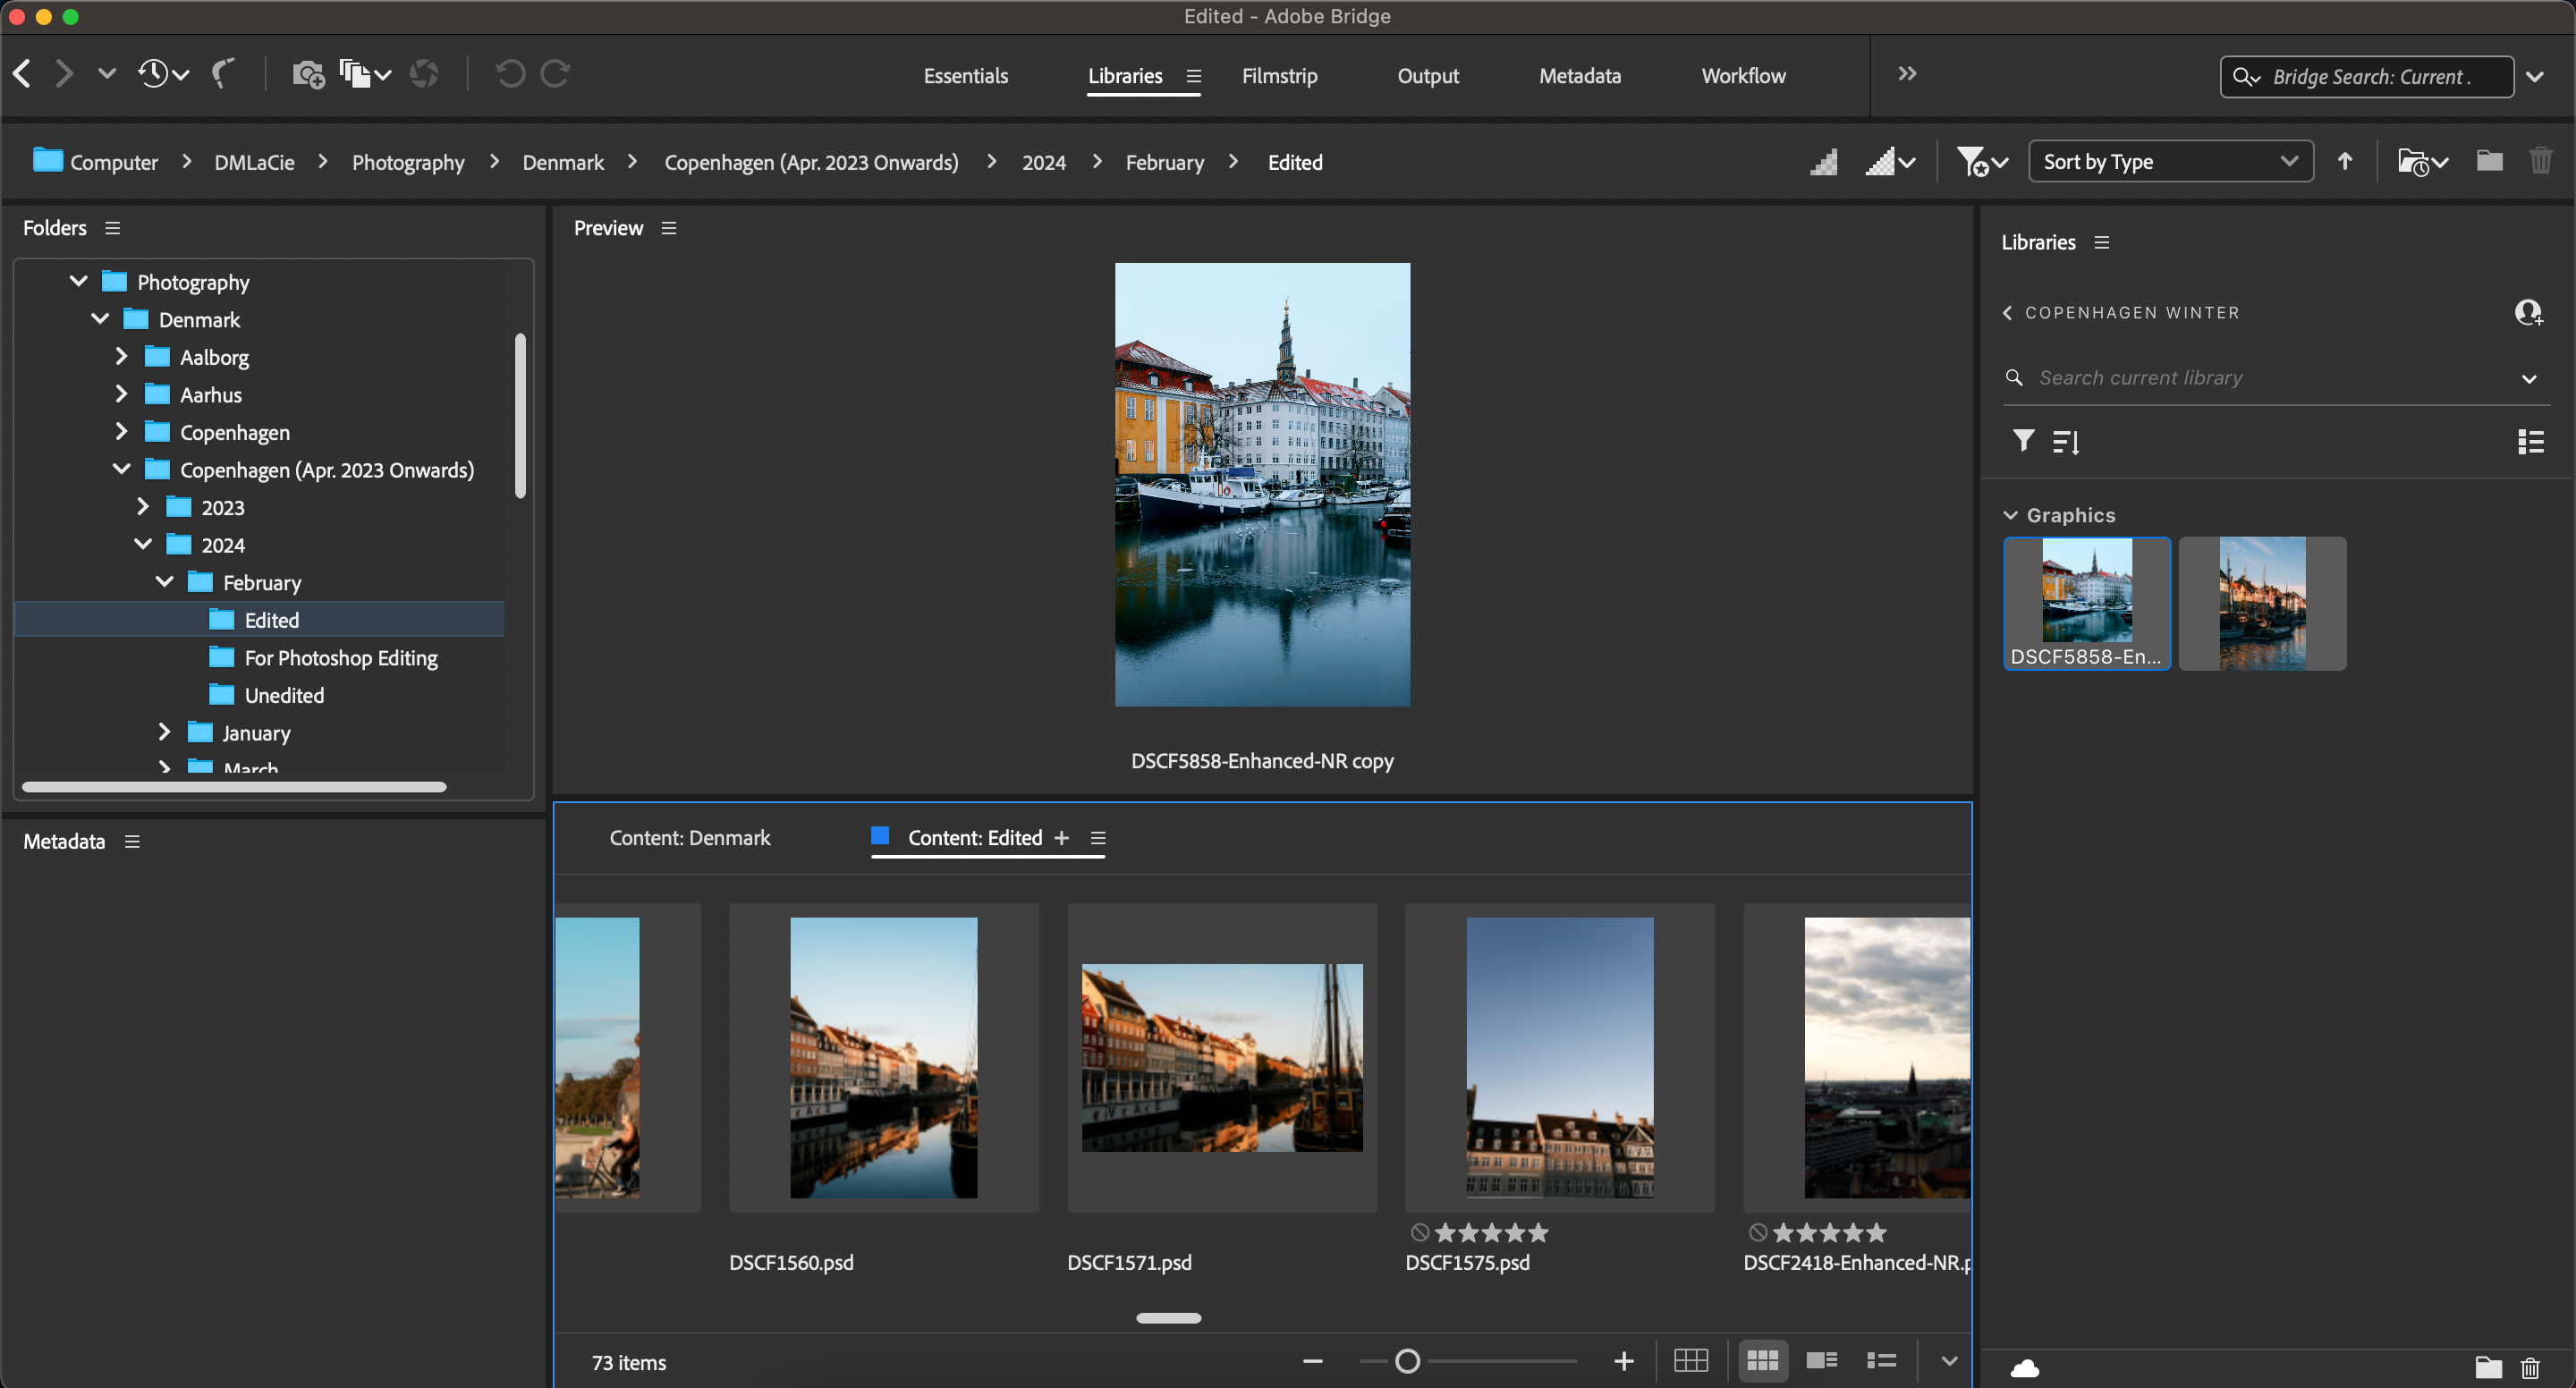 A new library created within the Adobe Bridge app 